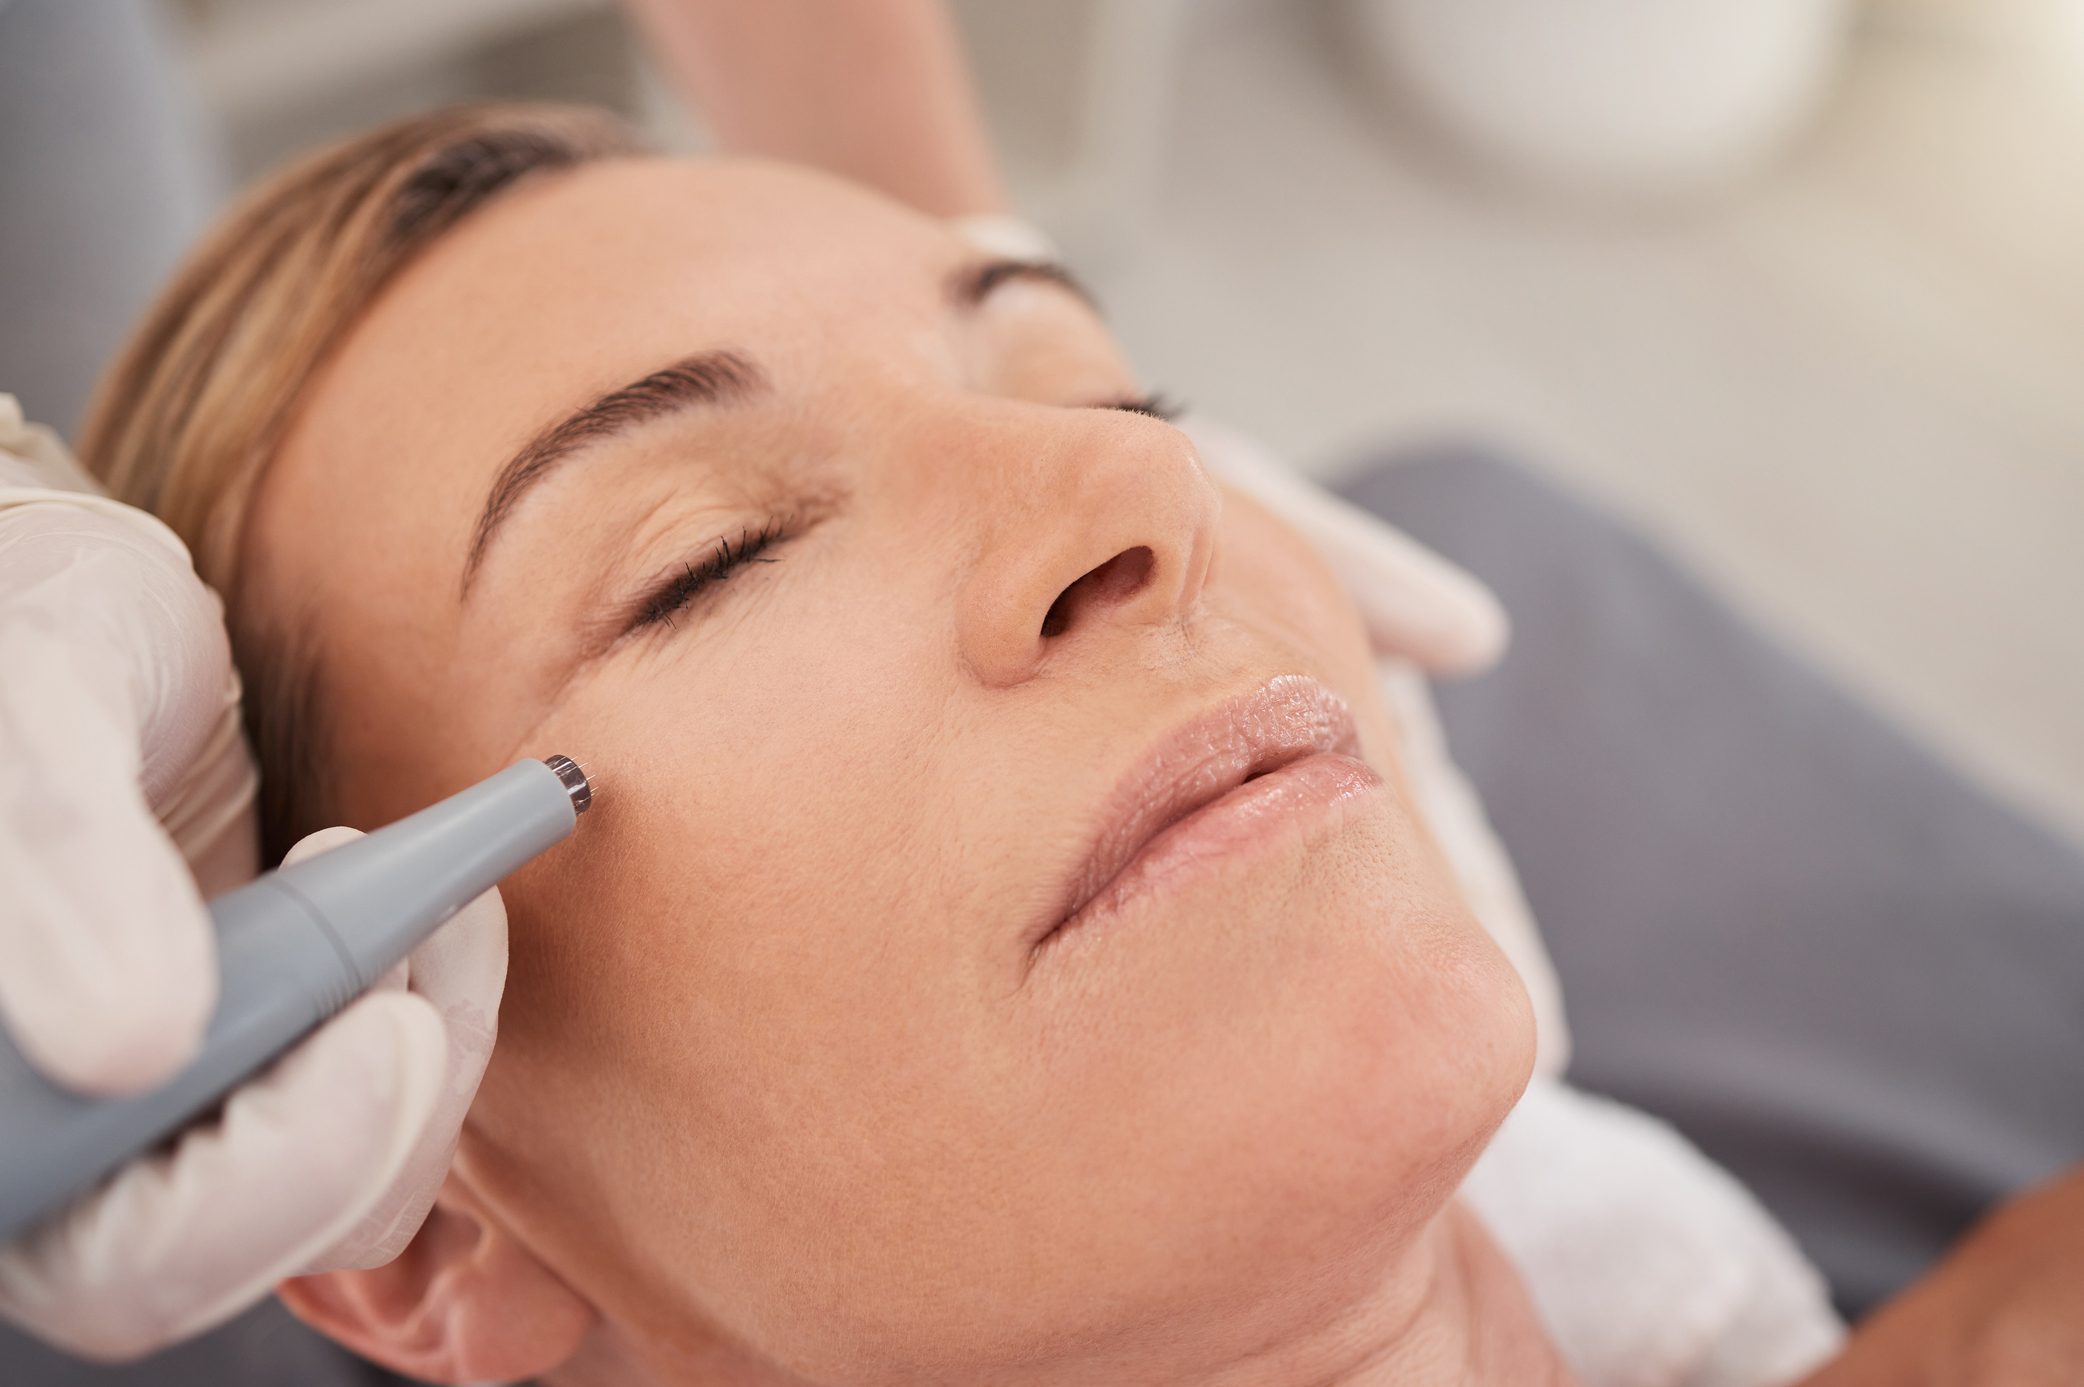 The era of non-invasive treatments is here to stay